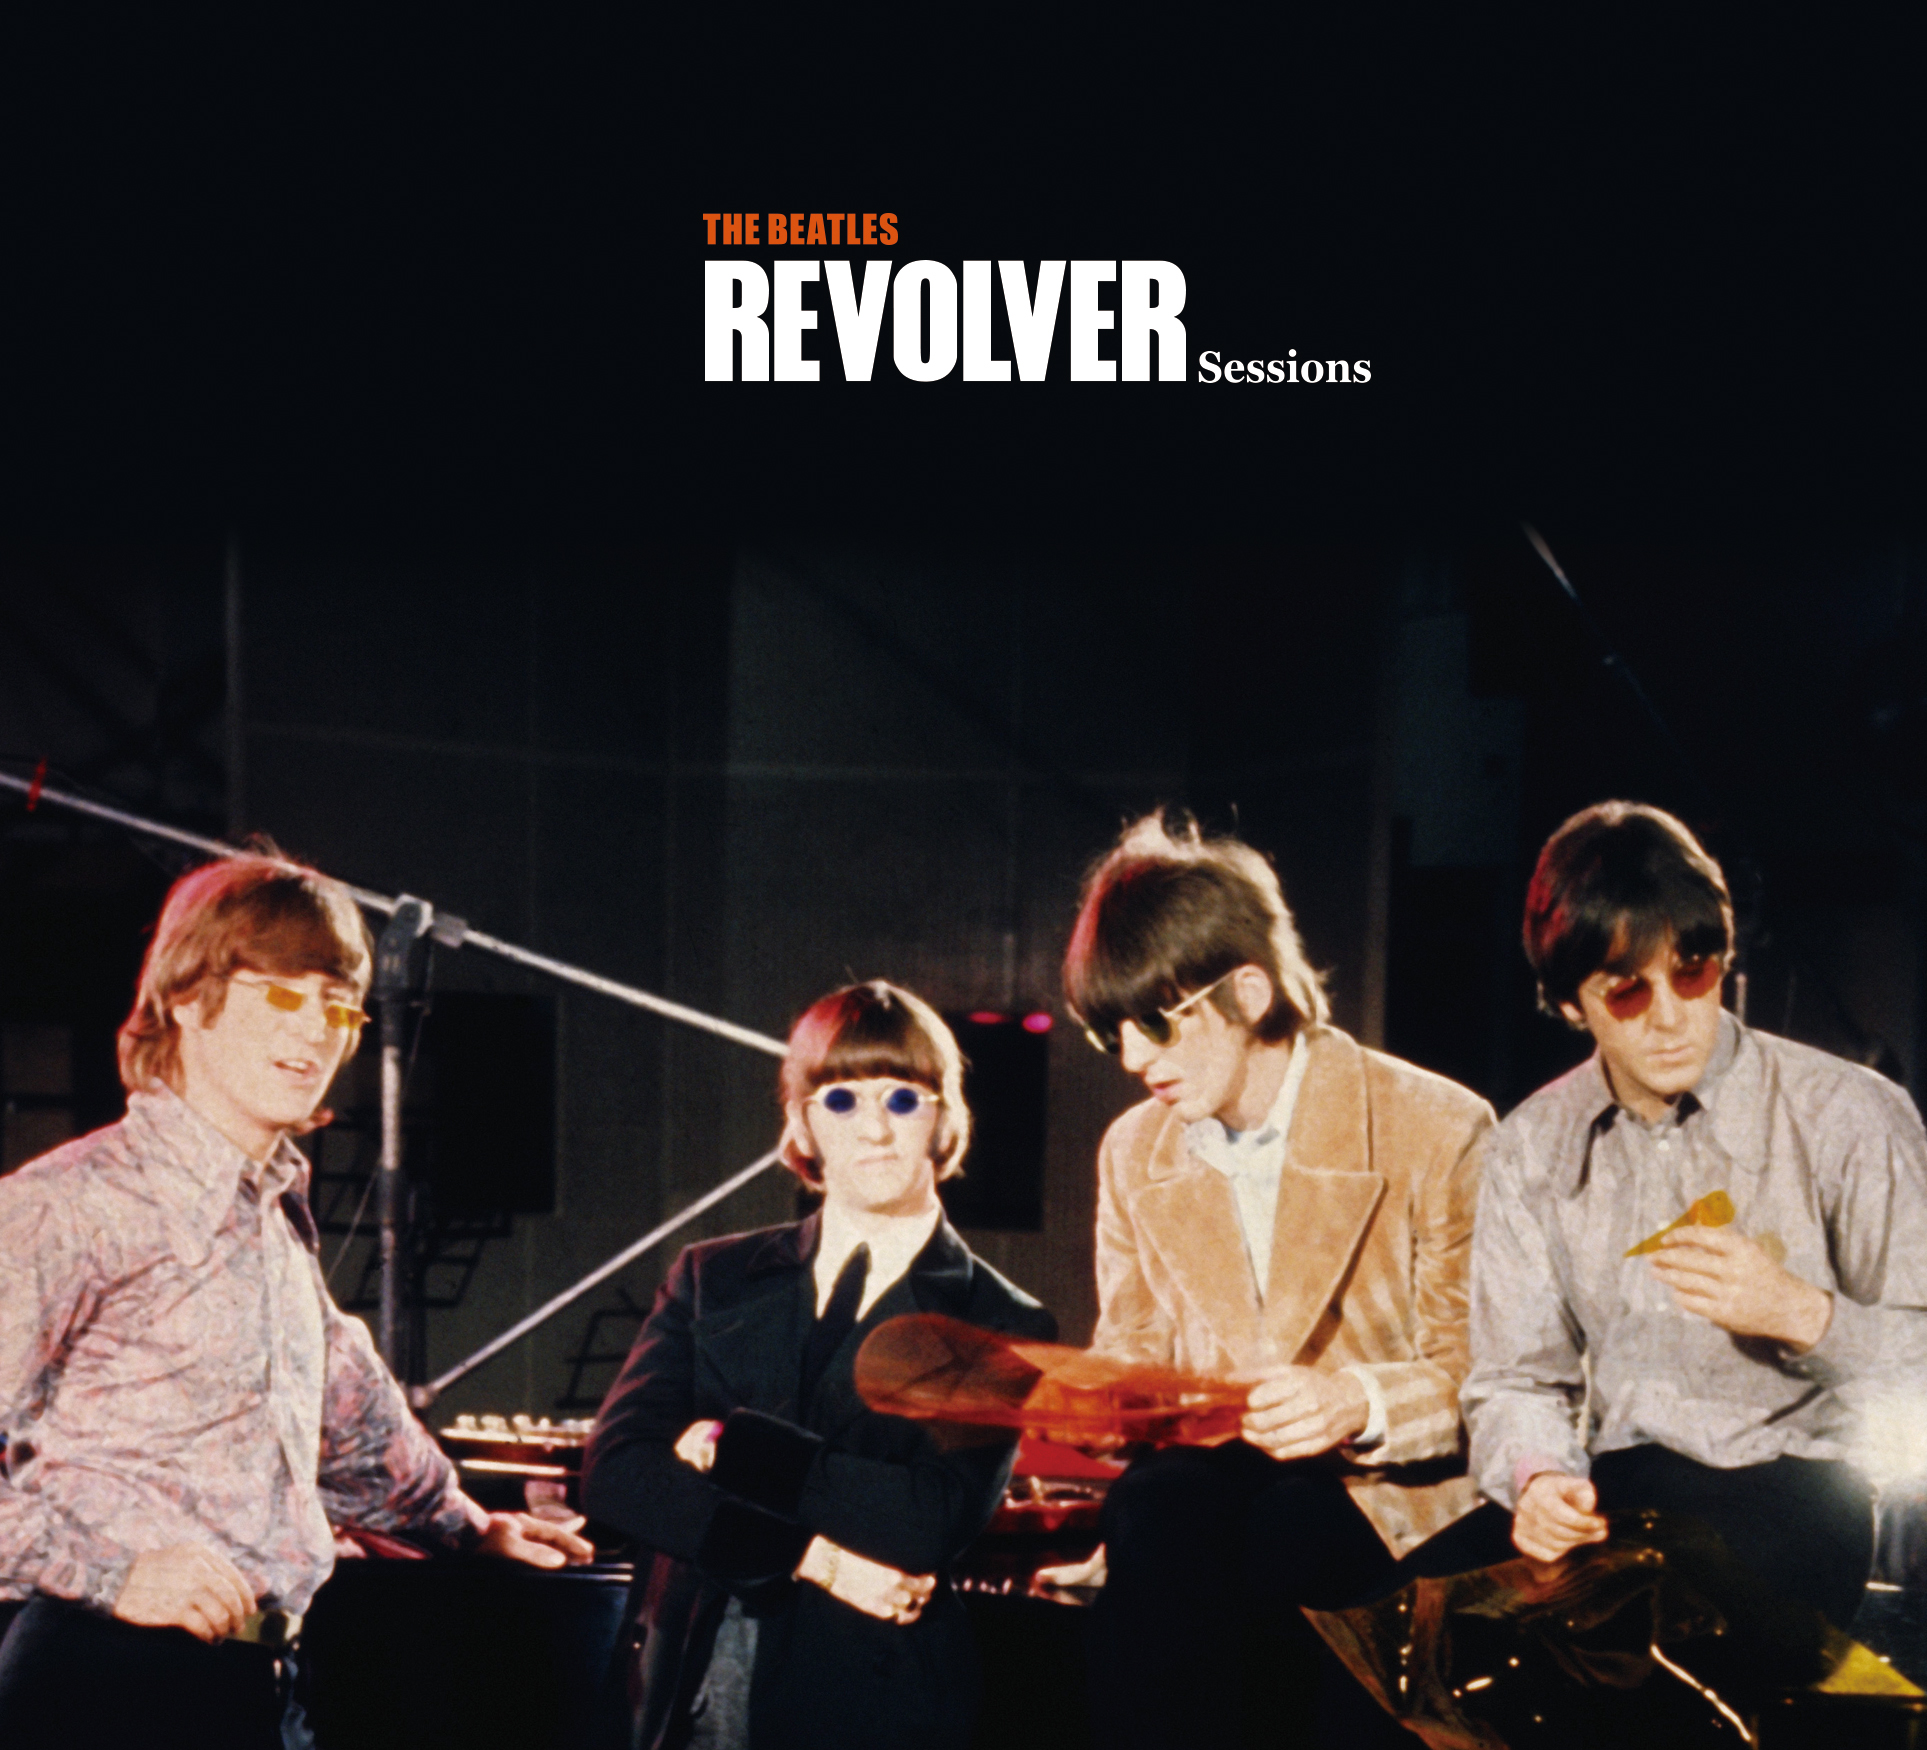 THE BEATLES / REVOLVER Sessions